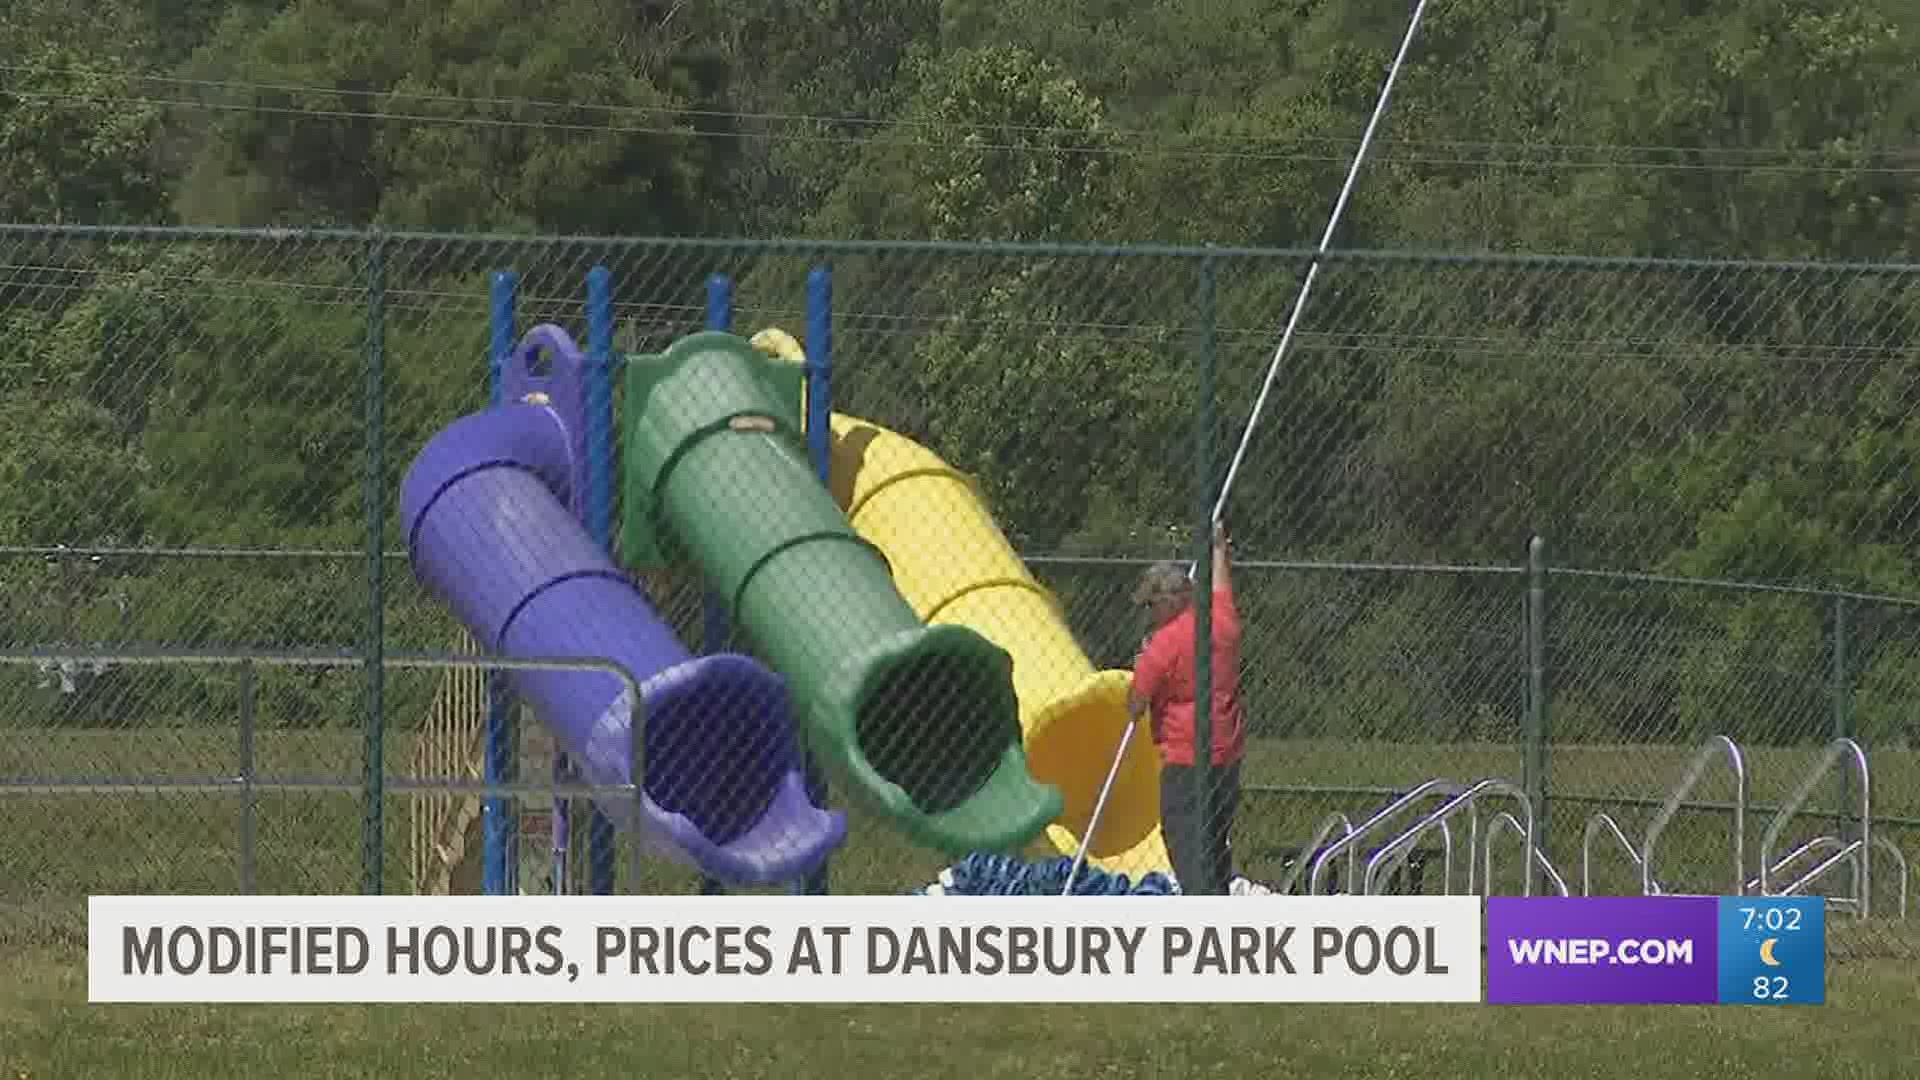 New safety guidelines will be in place at Dansbury Park Pool and summer passes will not be available this year.